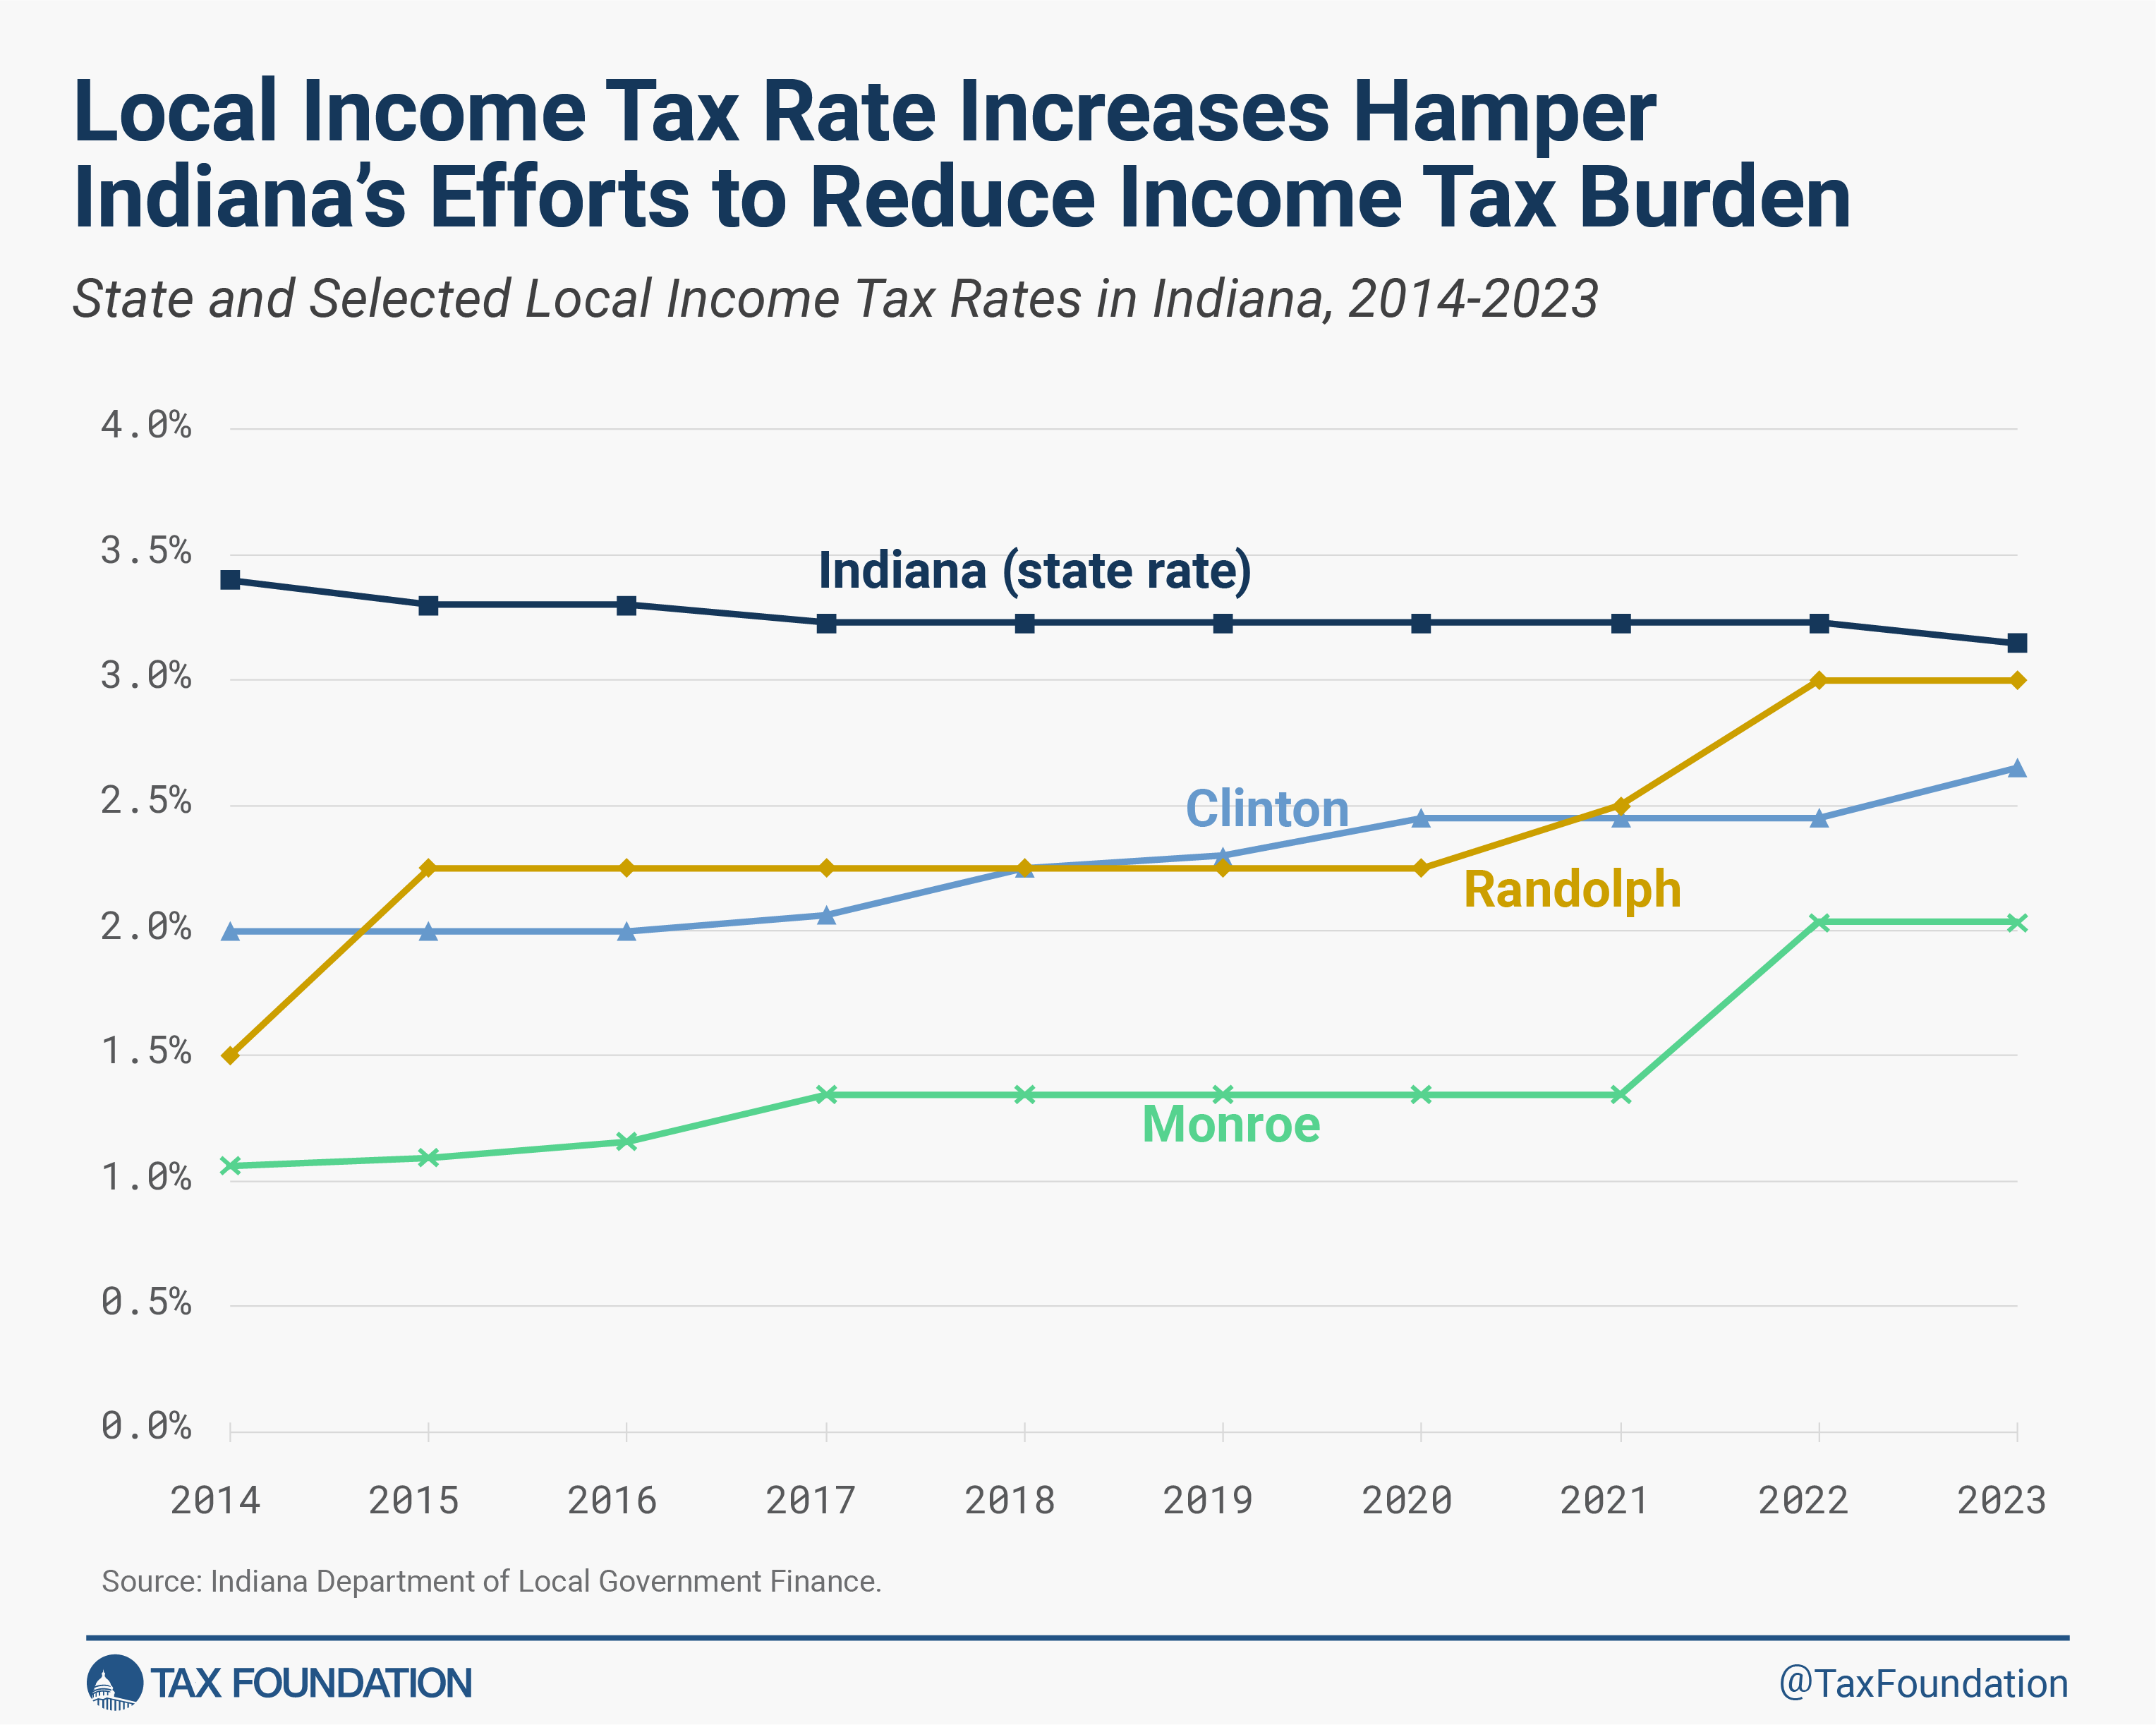 Local Income Tax Rate Increases Hamper Indiana’s Efforts to Reduce Income Tax Burden